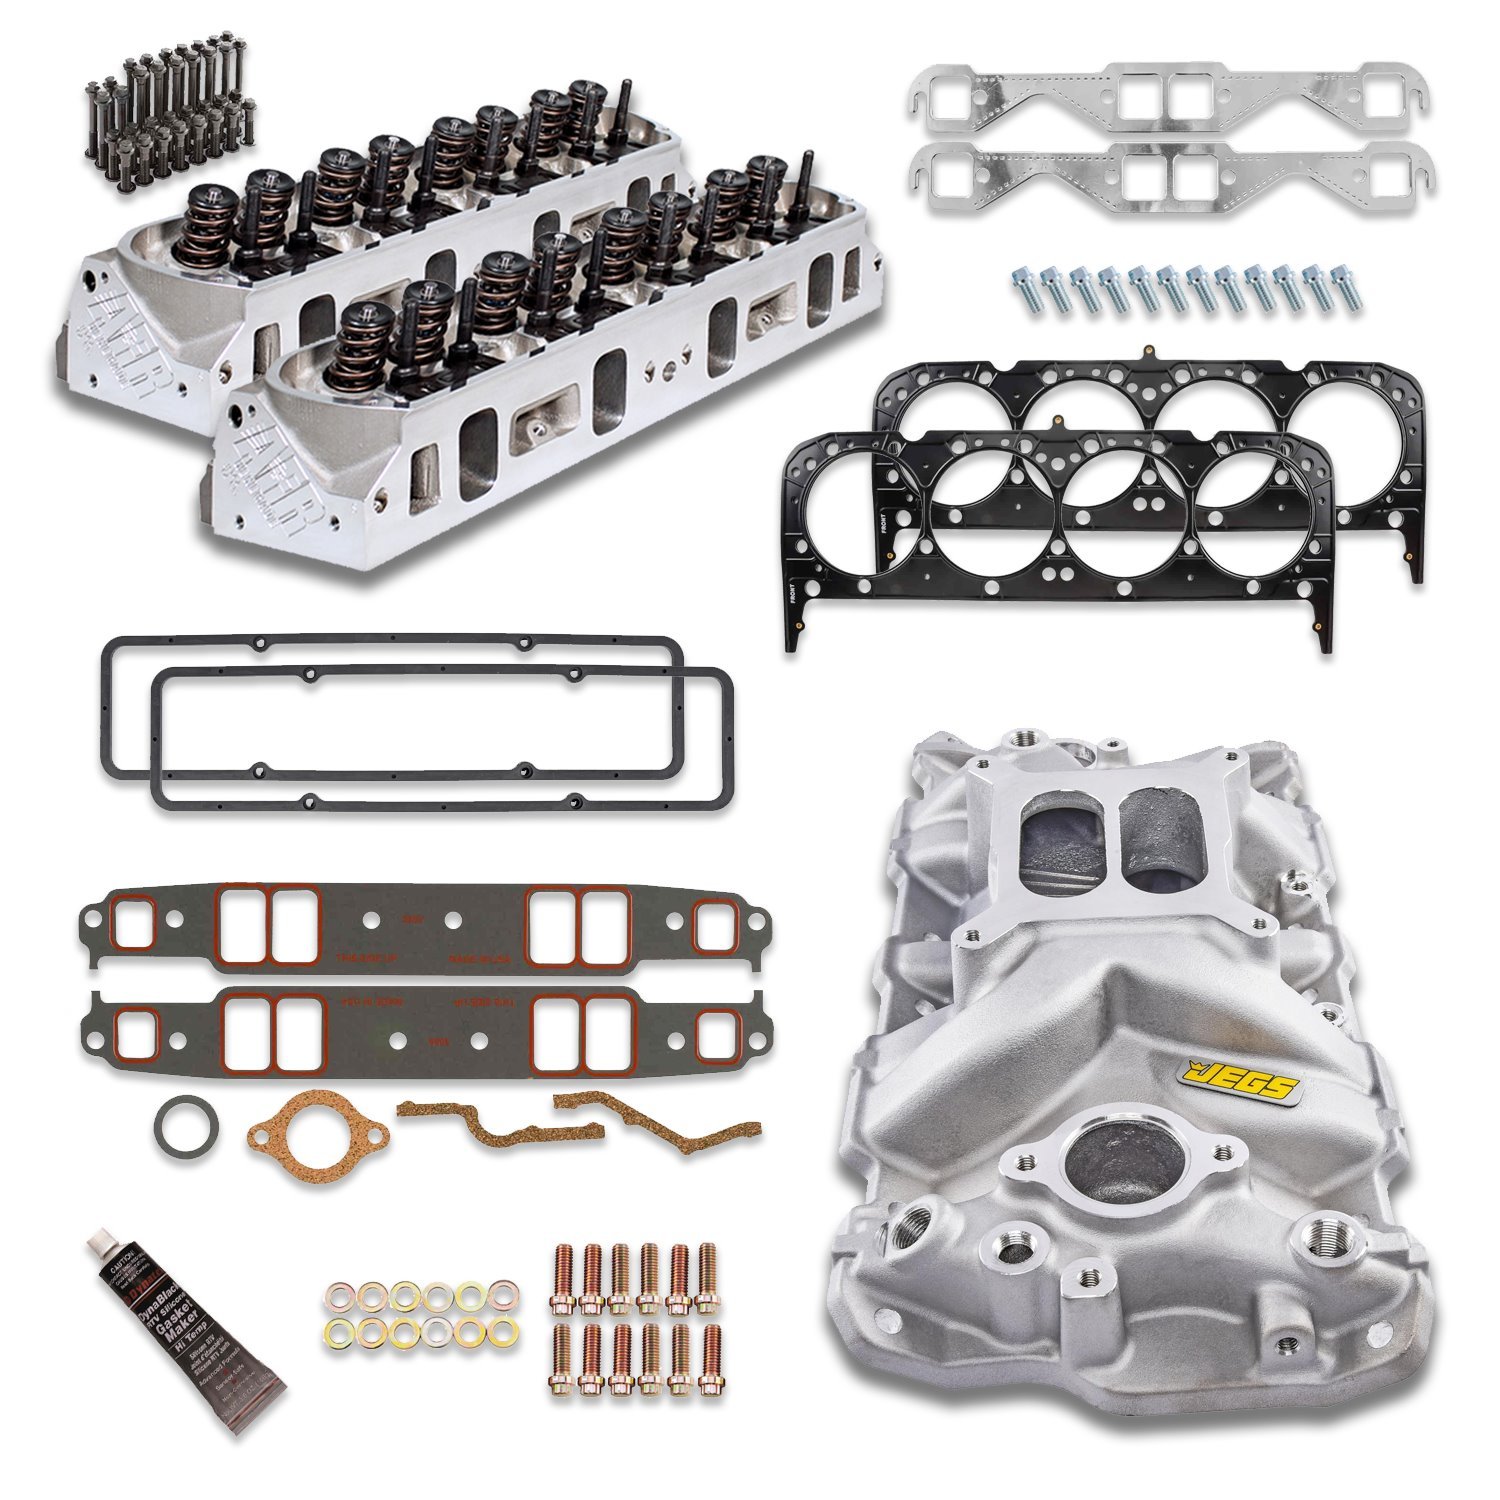 1001K1 Fully Assembled 195cc Enforcer Cylinder Head Kit for Small Block Chevy